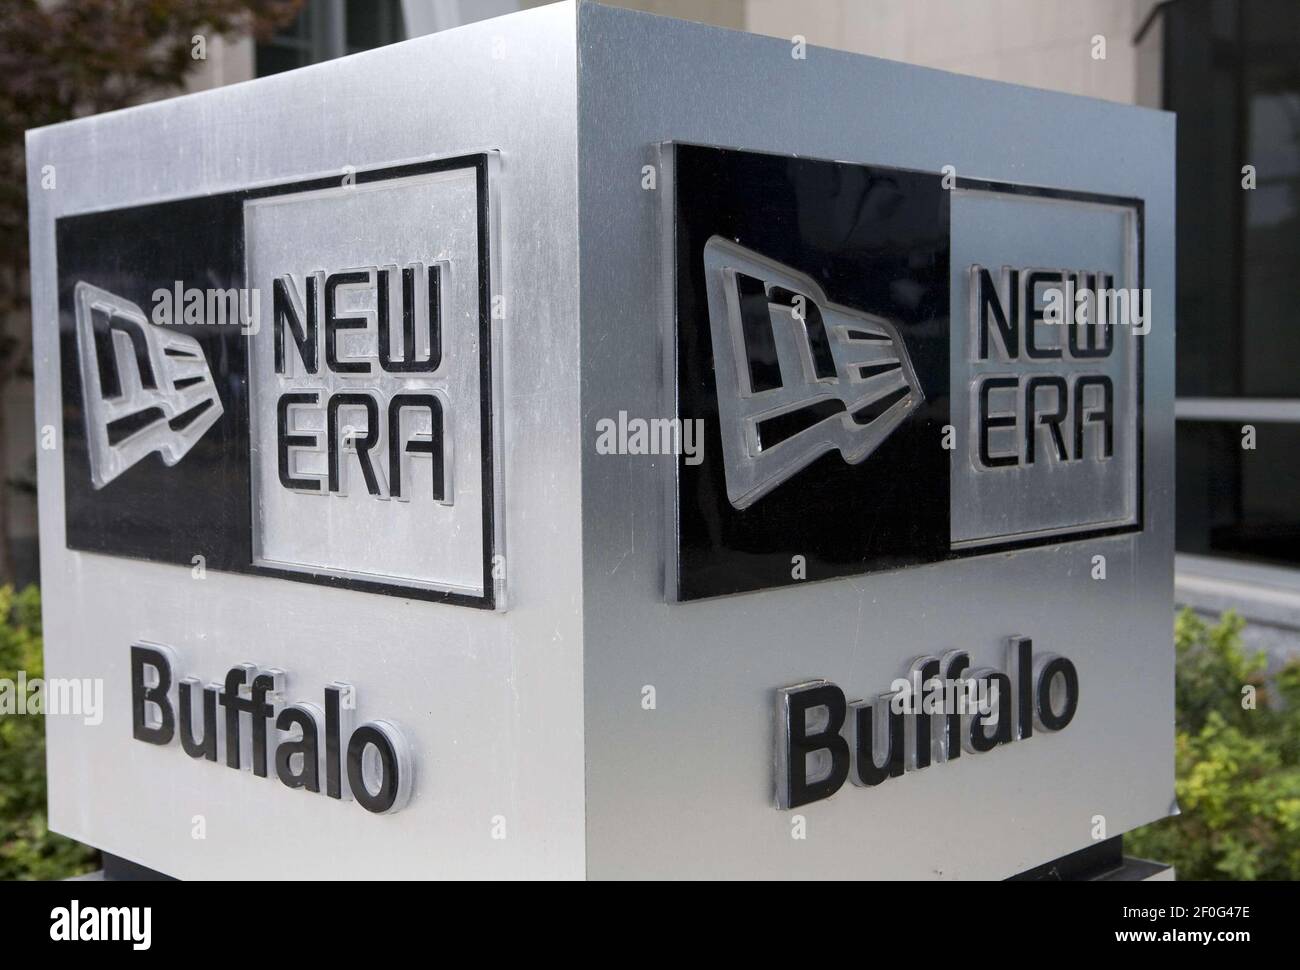 6 September 2010 - Buffalo, New York- The headquarters of the New Era Cap  Company. New Era is the official license holder to produce all of the  on-field caps for Major League